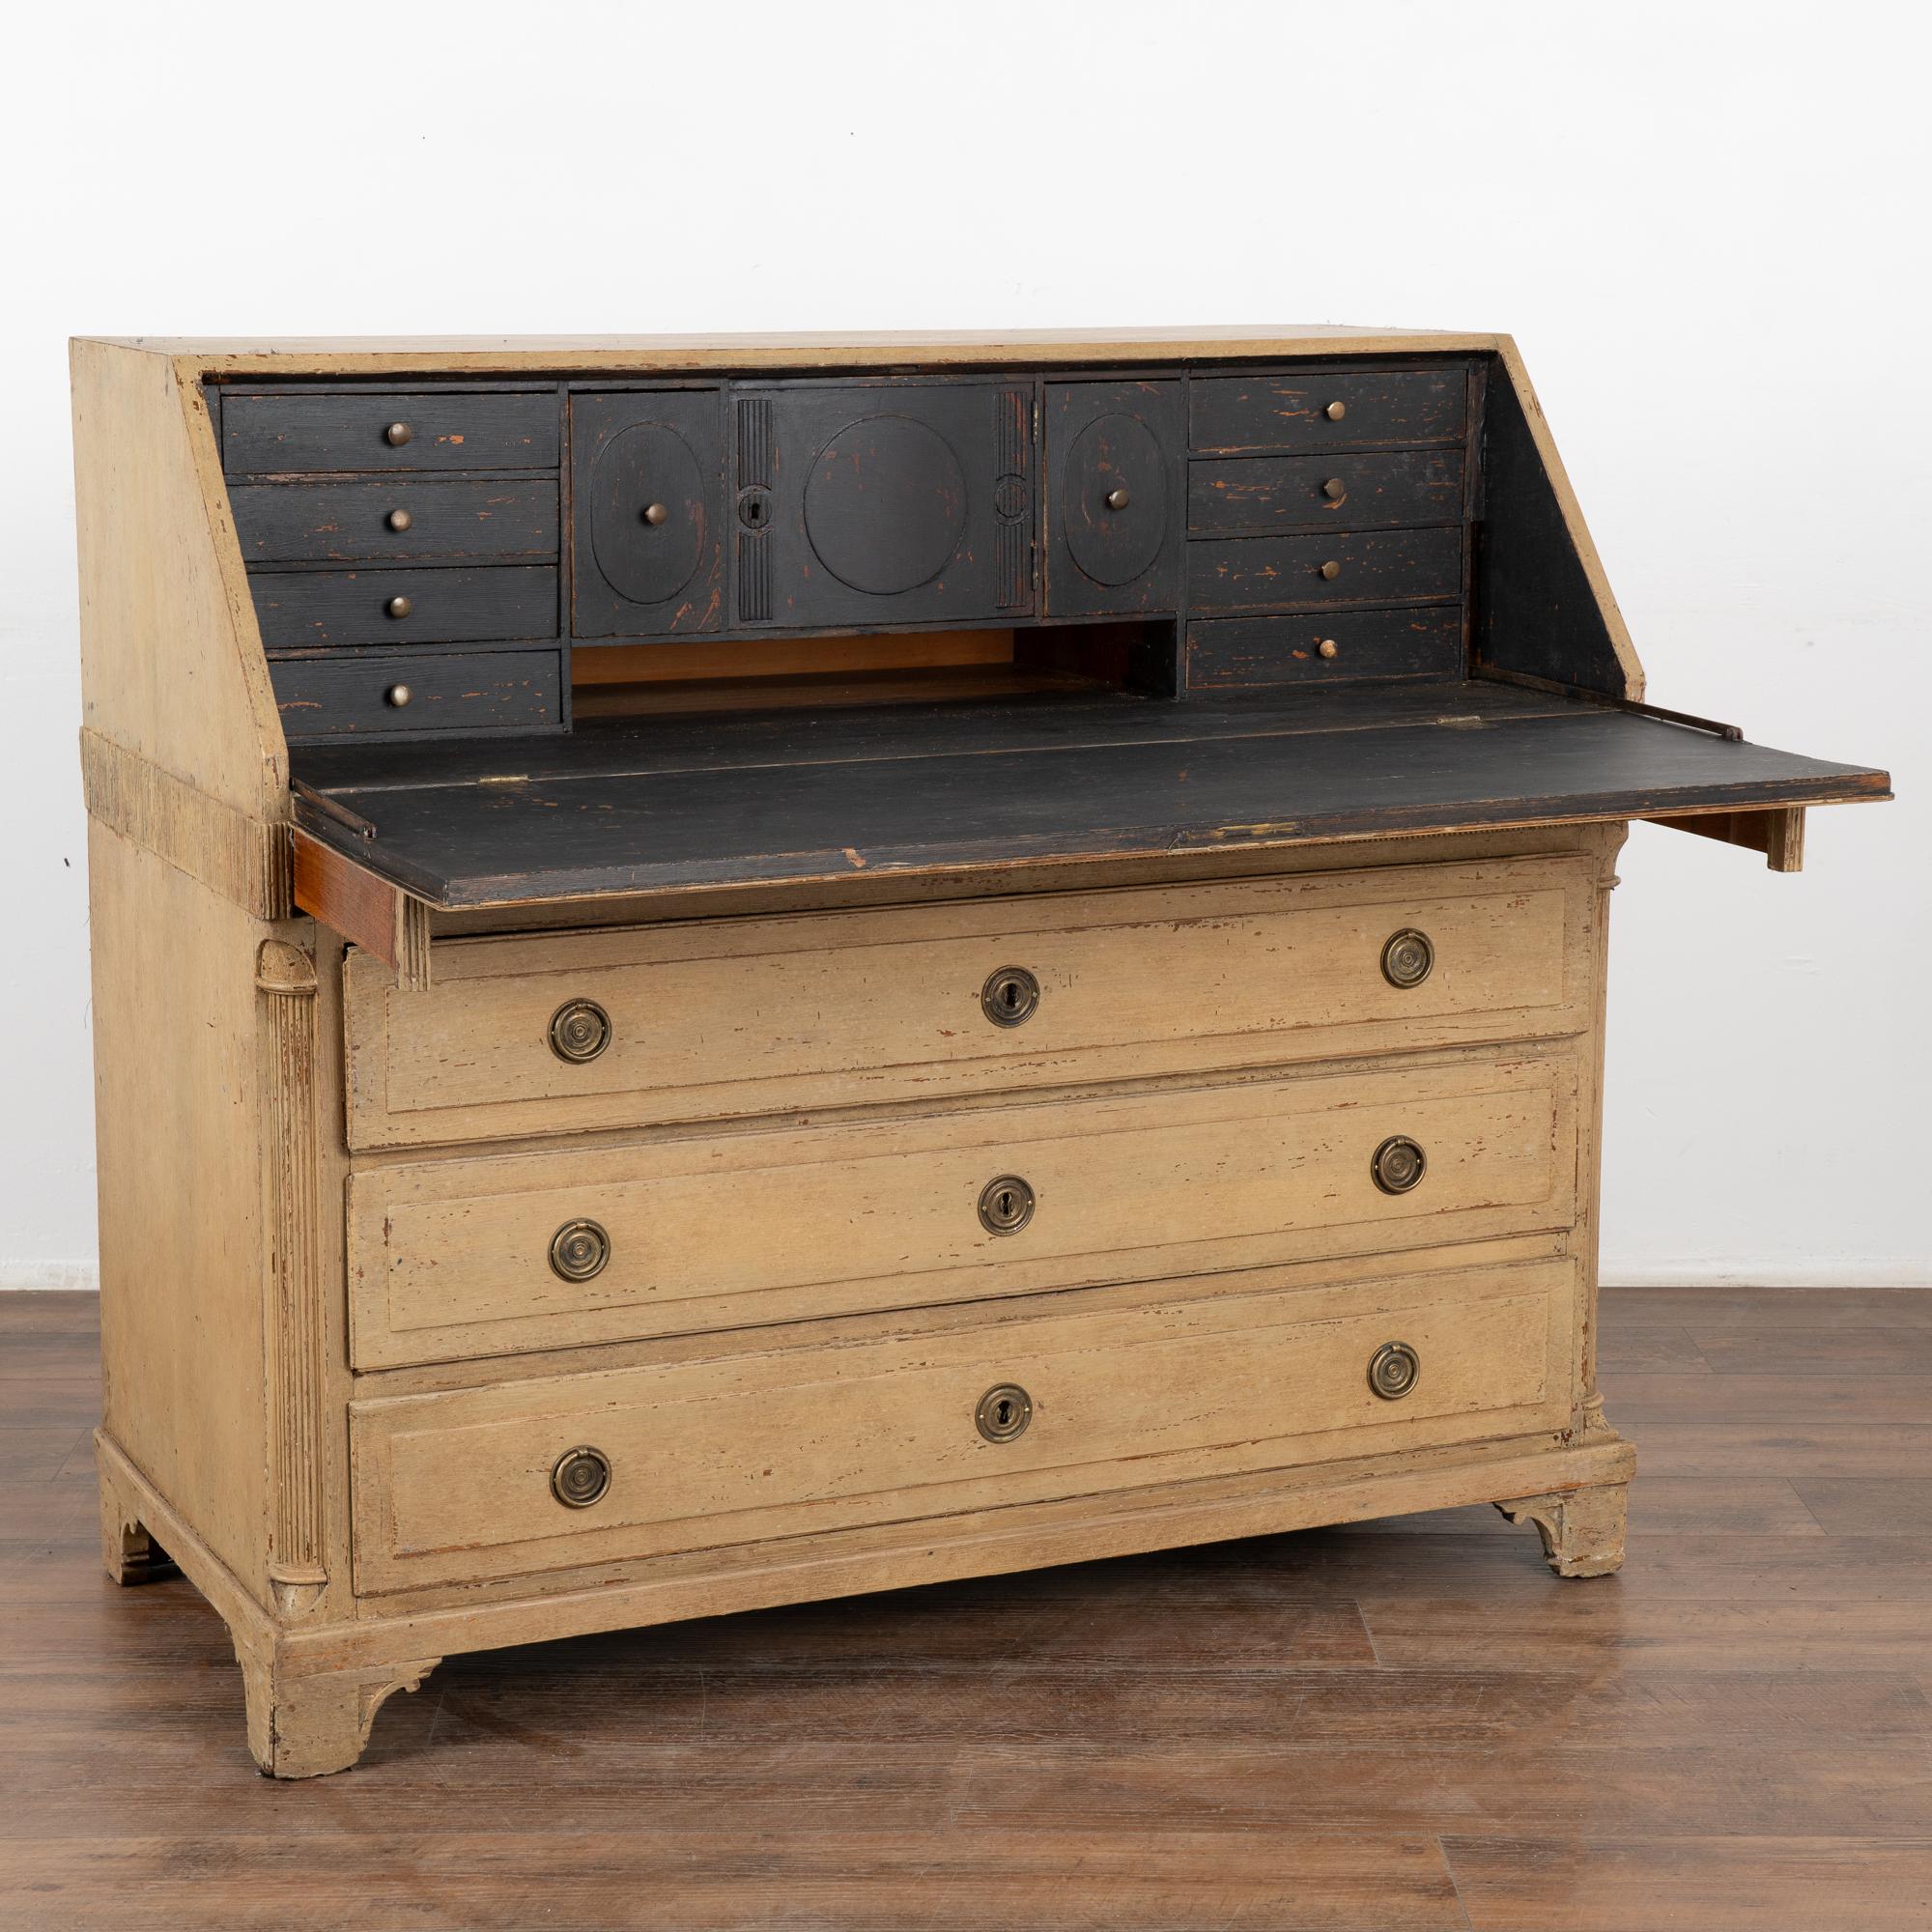 This oak secretary reflects the refined grace and style of early 1800's Denmark. The fluted carving along the mid-section and half columns at sides adds a decorative touch to the drop down desk. 
The traditional interior has small drawers and